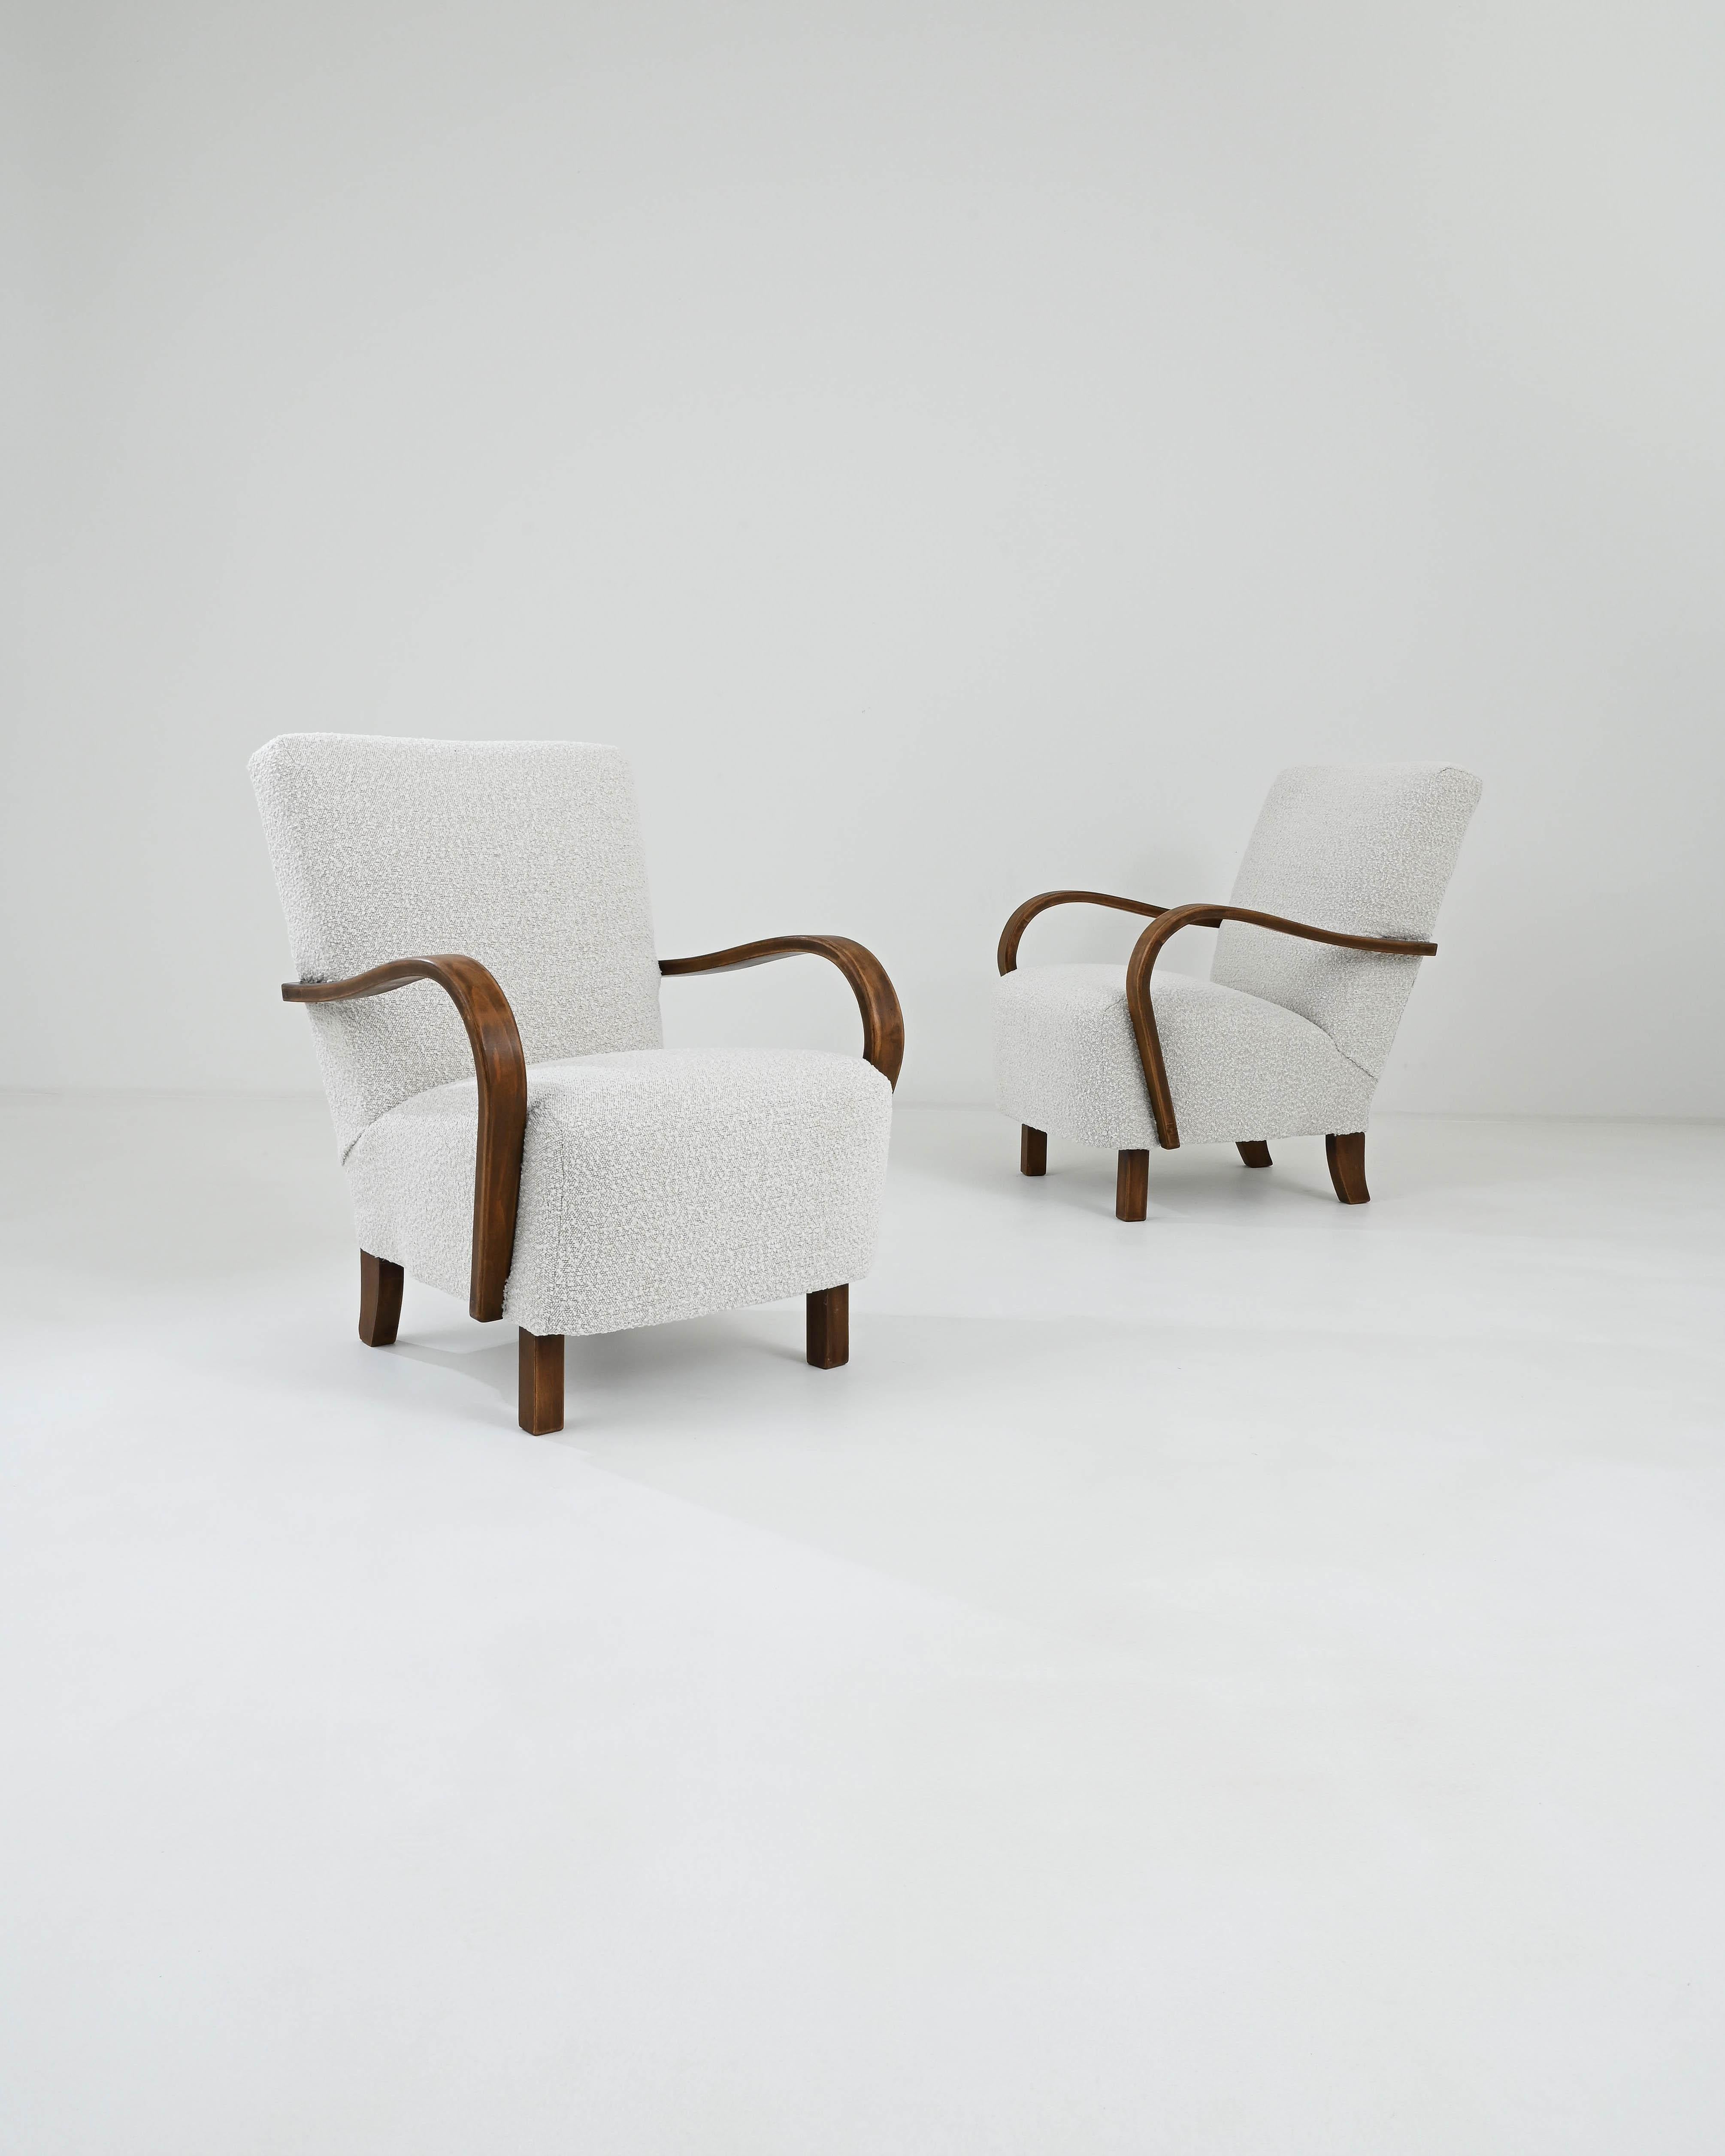 The sensuous curvature of bentwood stands as one of the defining characteristics of J. Halabala's pioneering designs. Crafted in Czechia during the 1930s, this pair of armchairs showcases undulating armrests and splayed back legs, imparting a sense